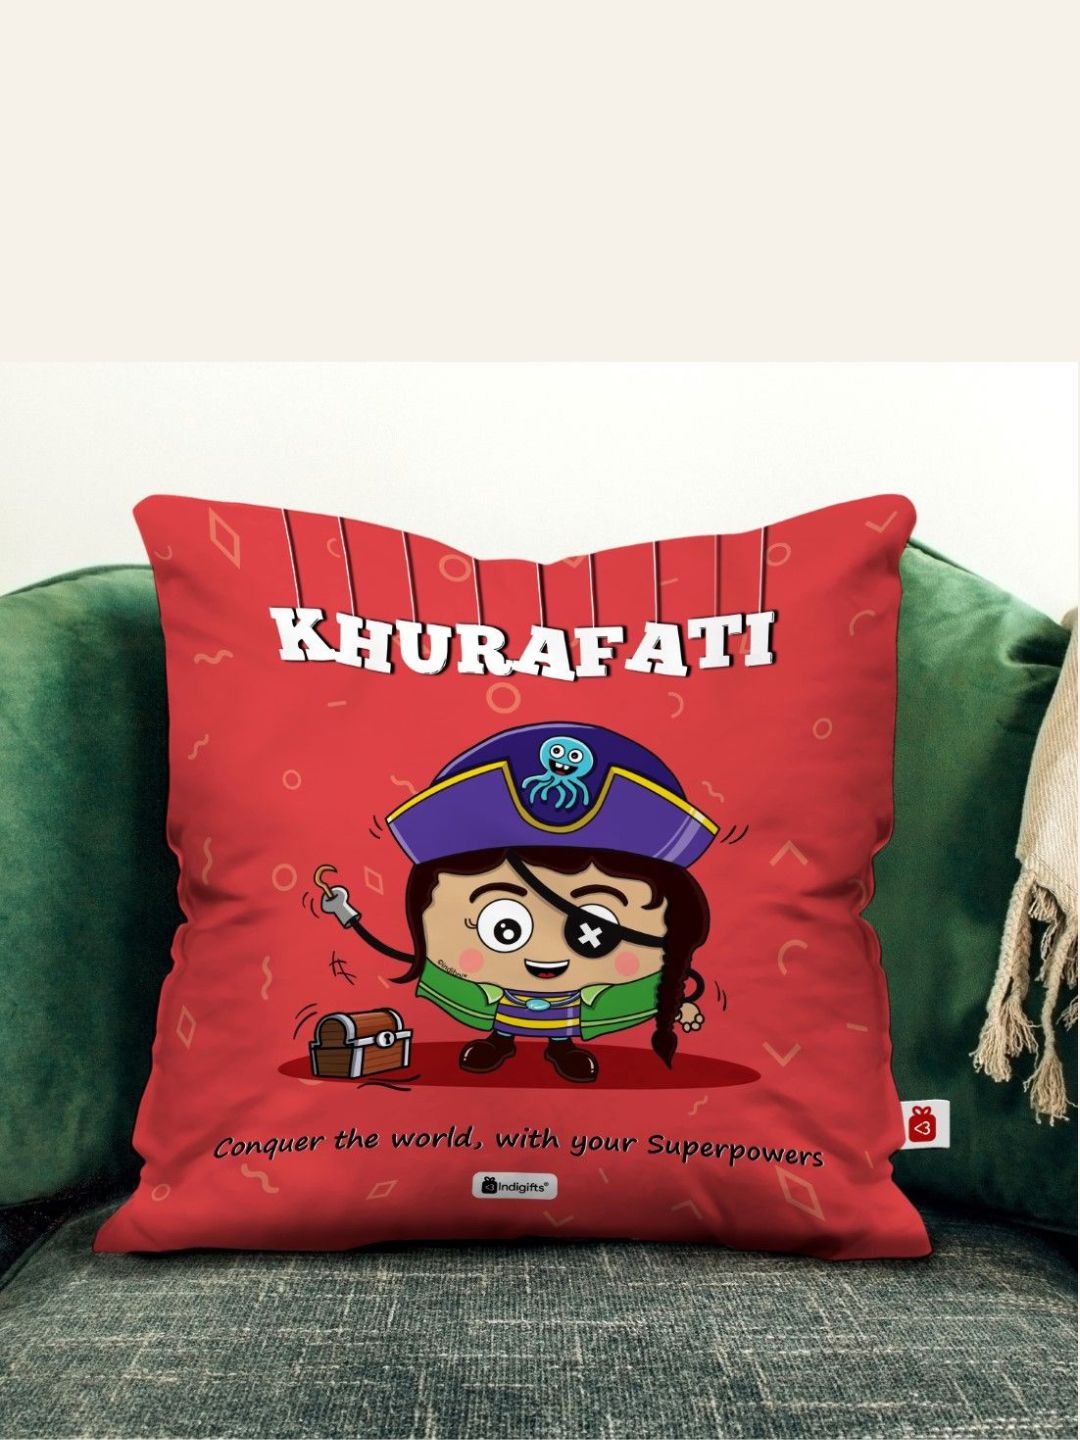 Indigifts Satin Khurafati Printed Cushion Cover 12 x12 Inch with Filler (Red)